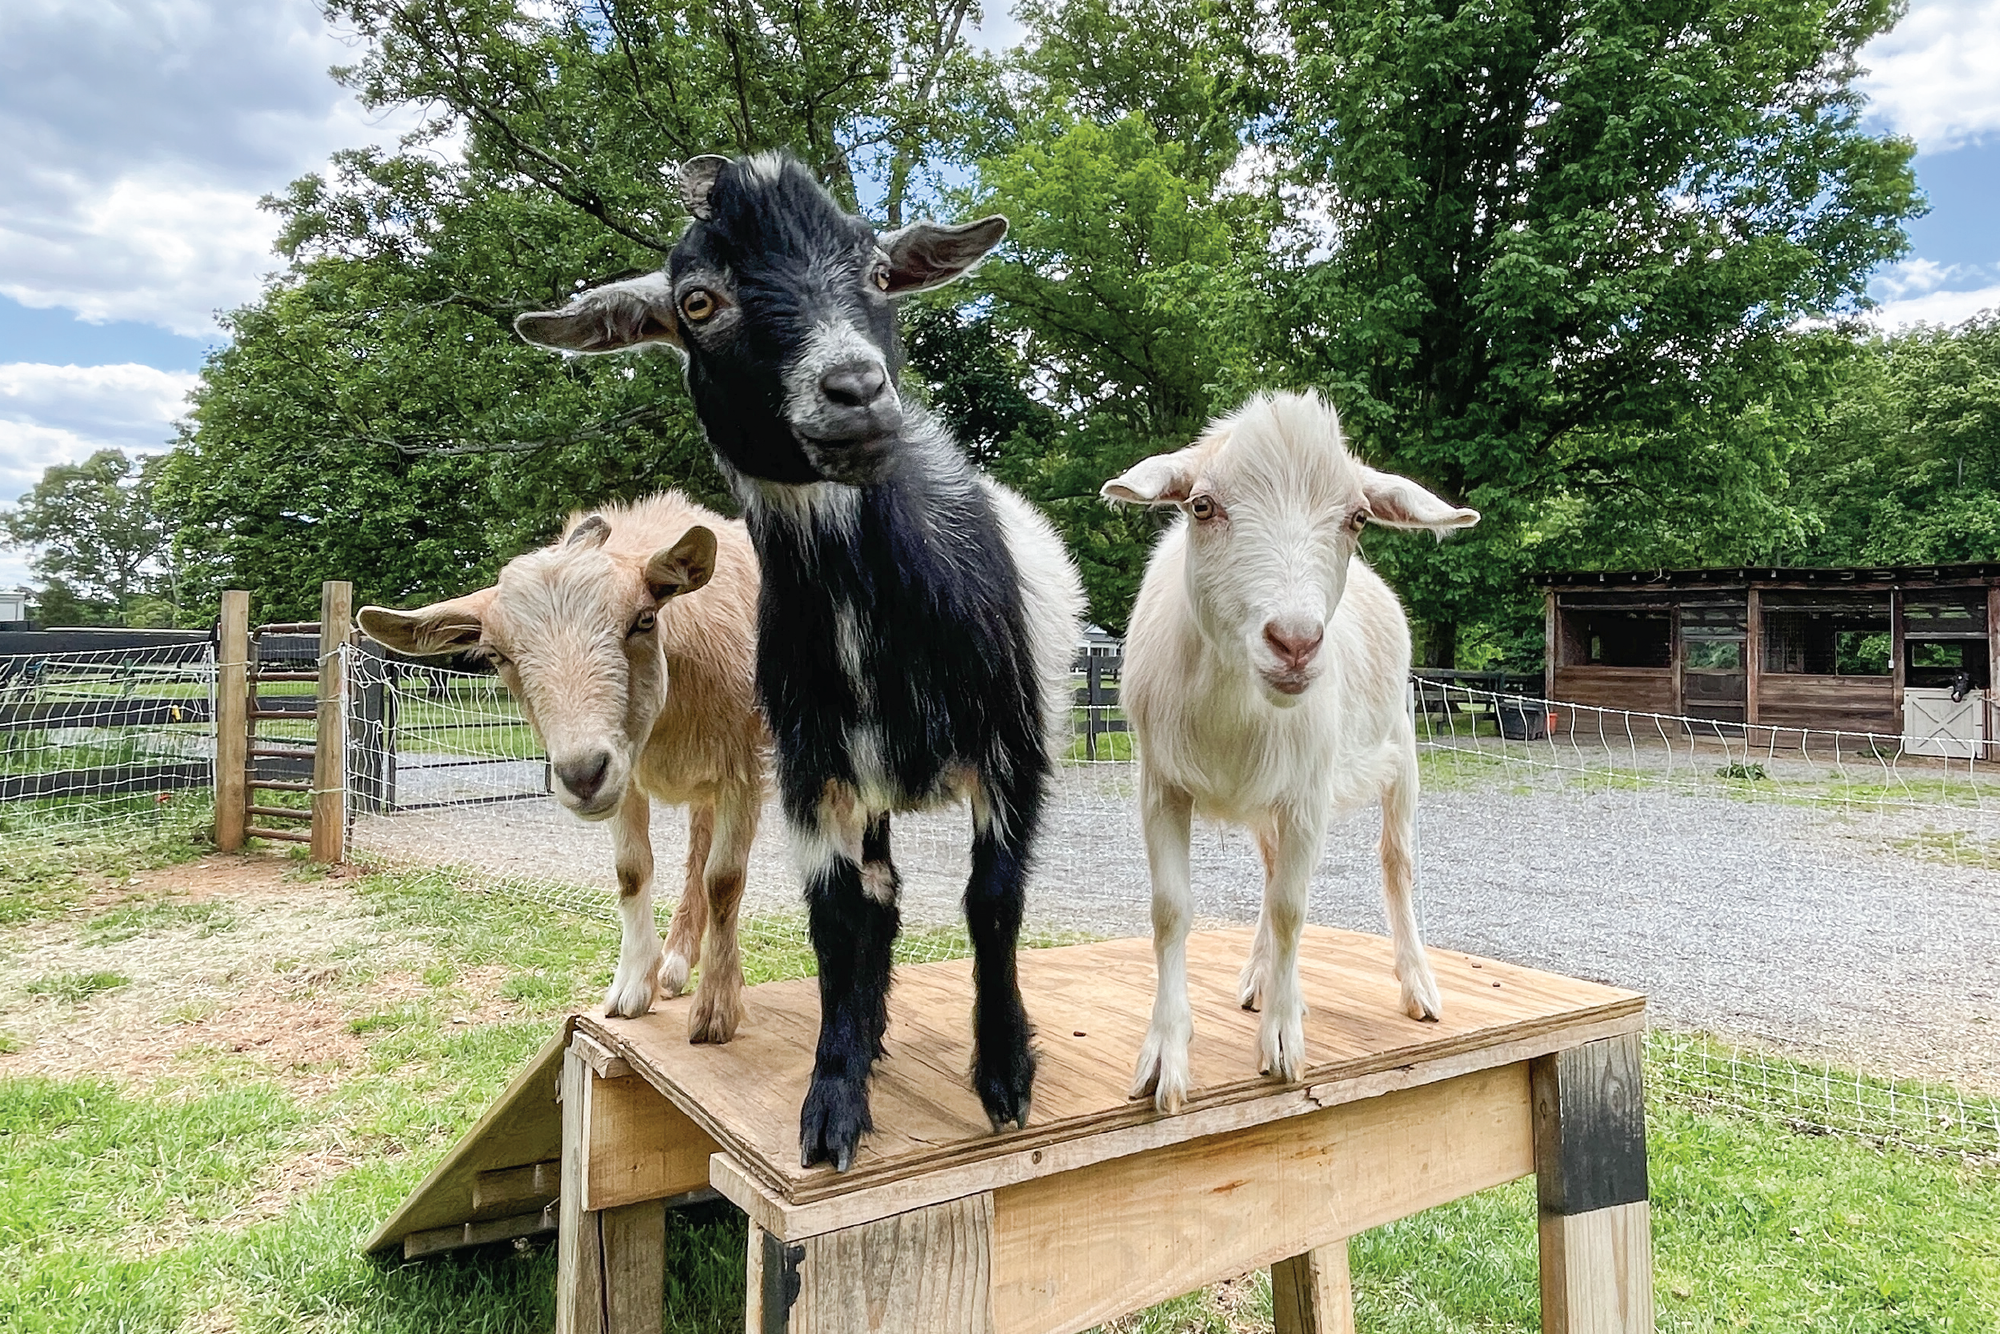 The Mini Goat Playtime experience encompasses learning to care for, feed, leash walk, and play with our sweet baby goats!